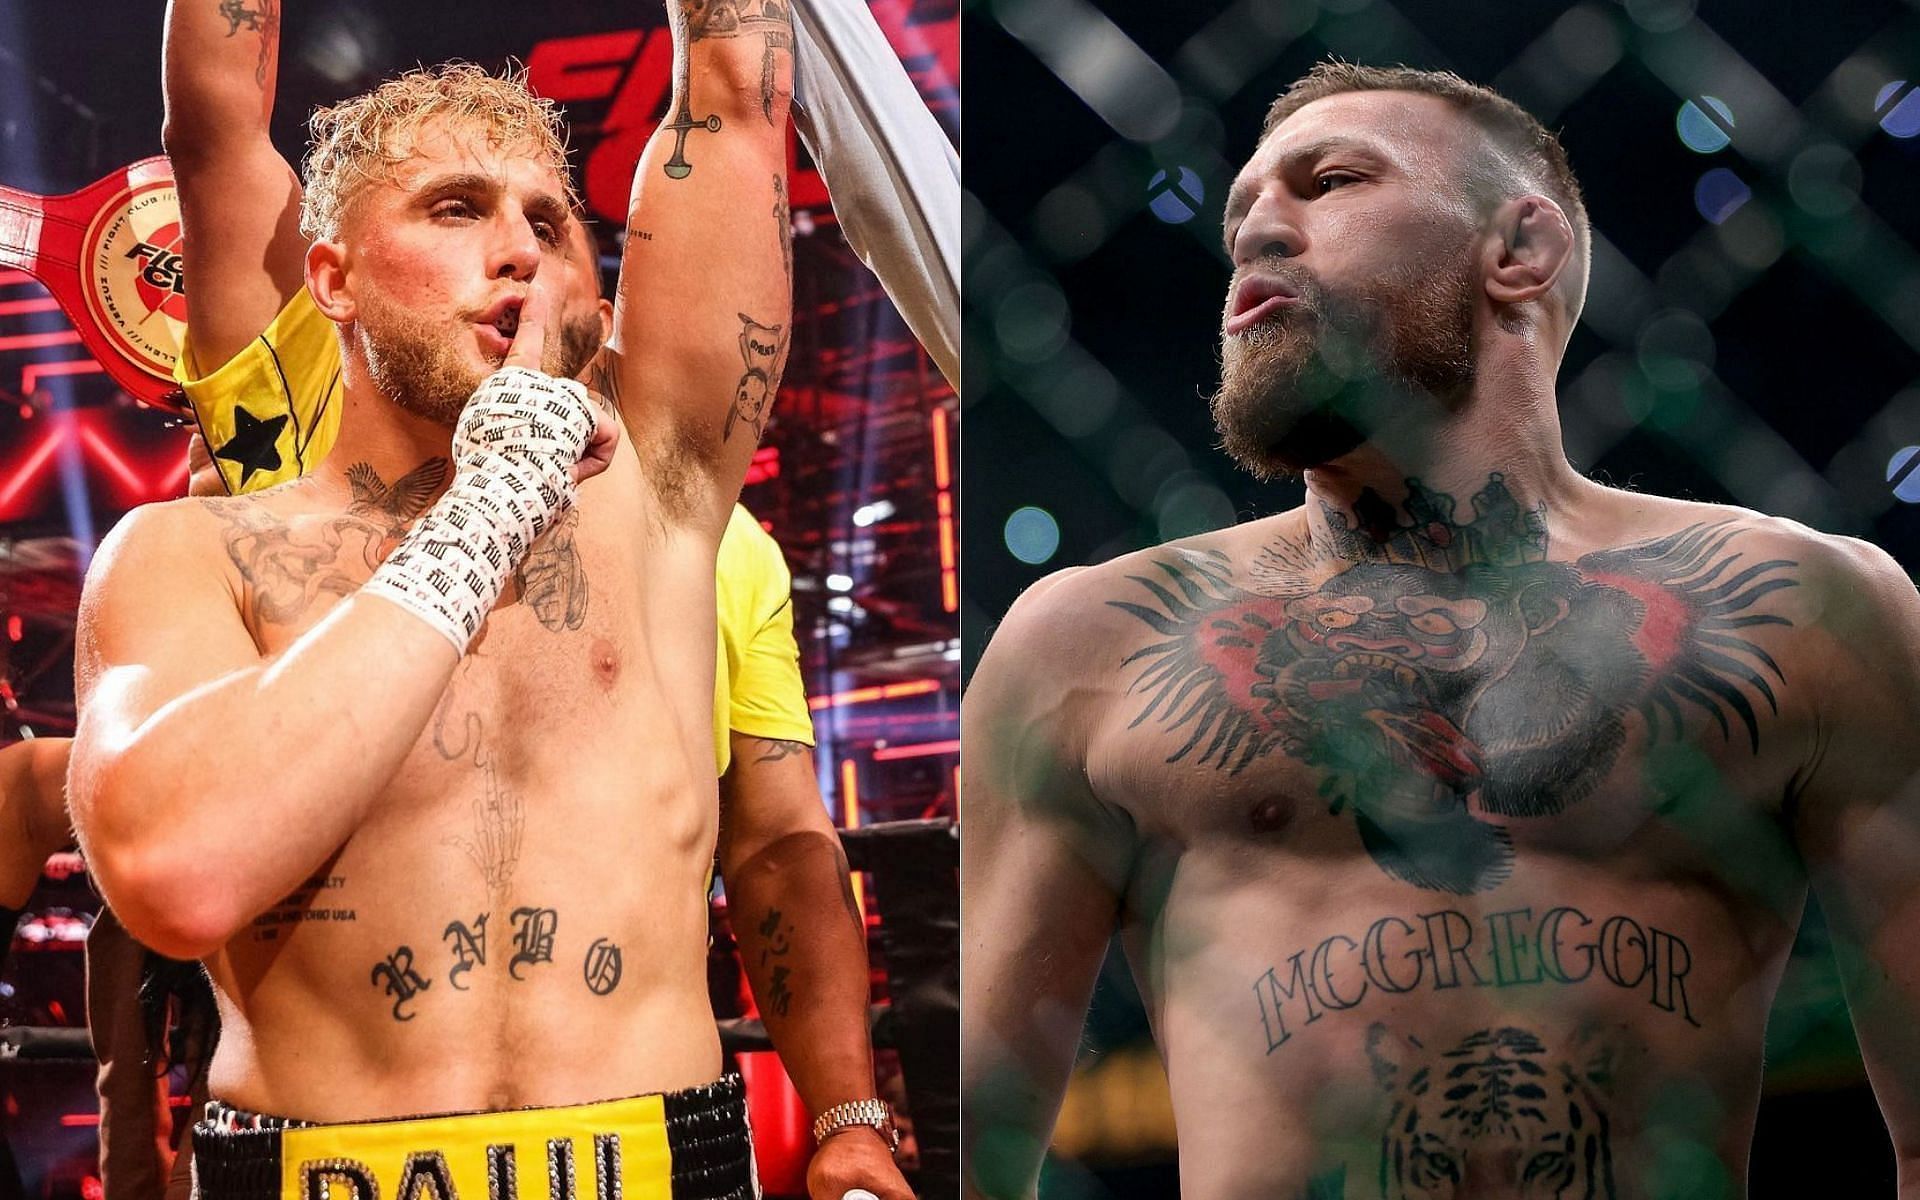 Jake Paul (left) and Conor McGregor (right) [Image courtesy - Getty]